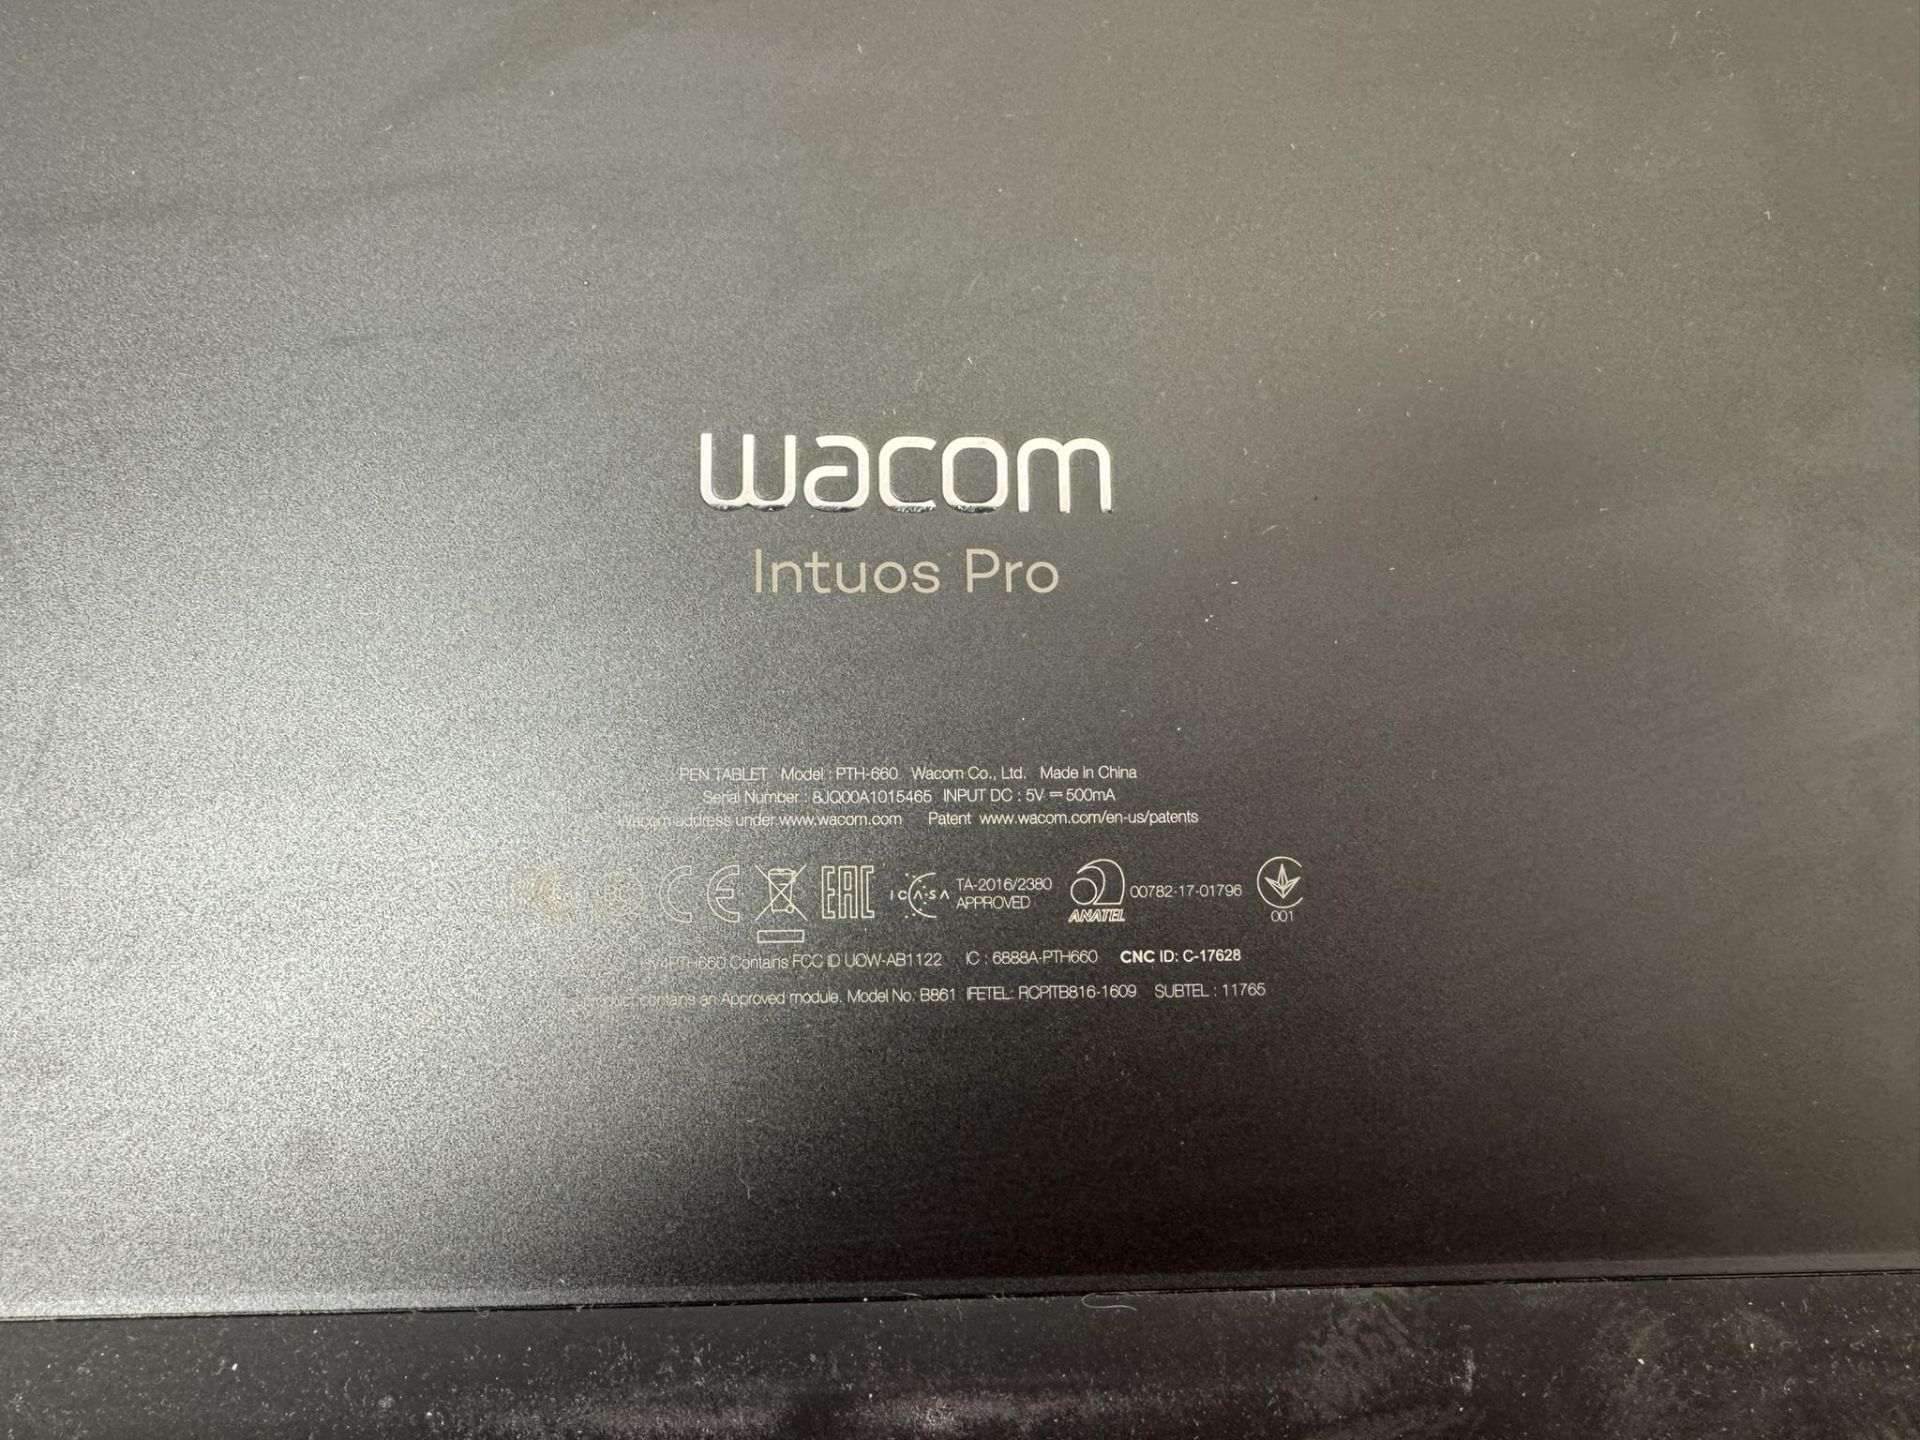 Wacom PTH660 Intuos Pro Digital Graphic Drawing Tablet - Image 2 of 2